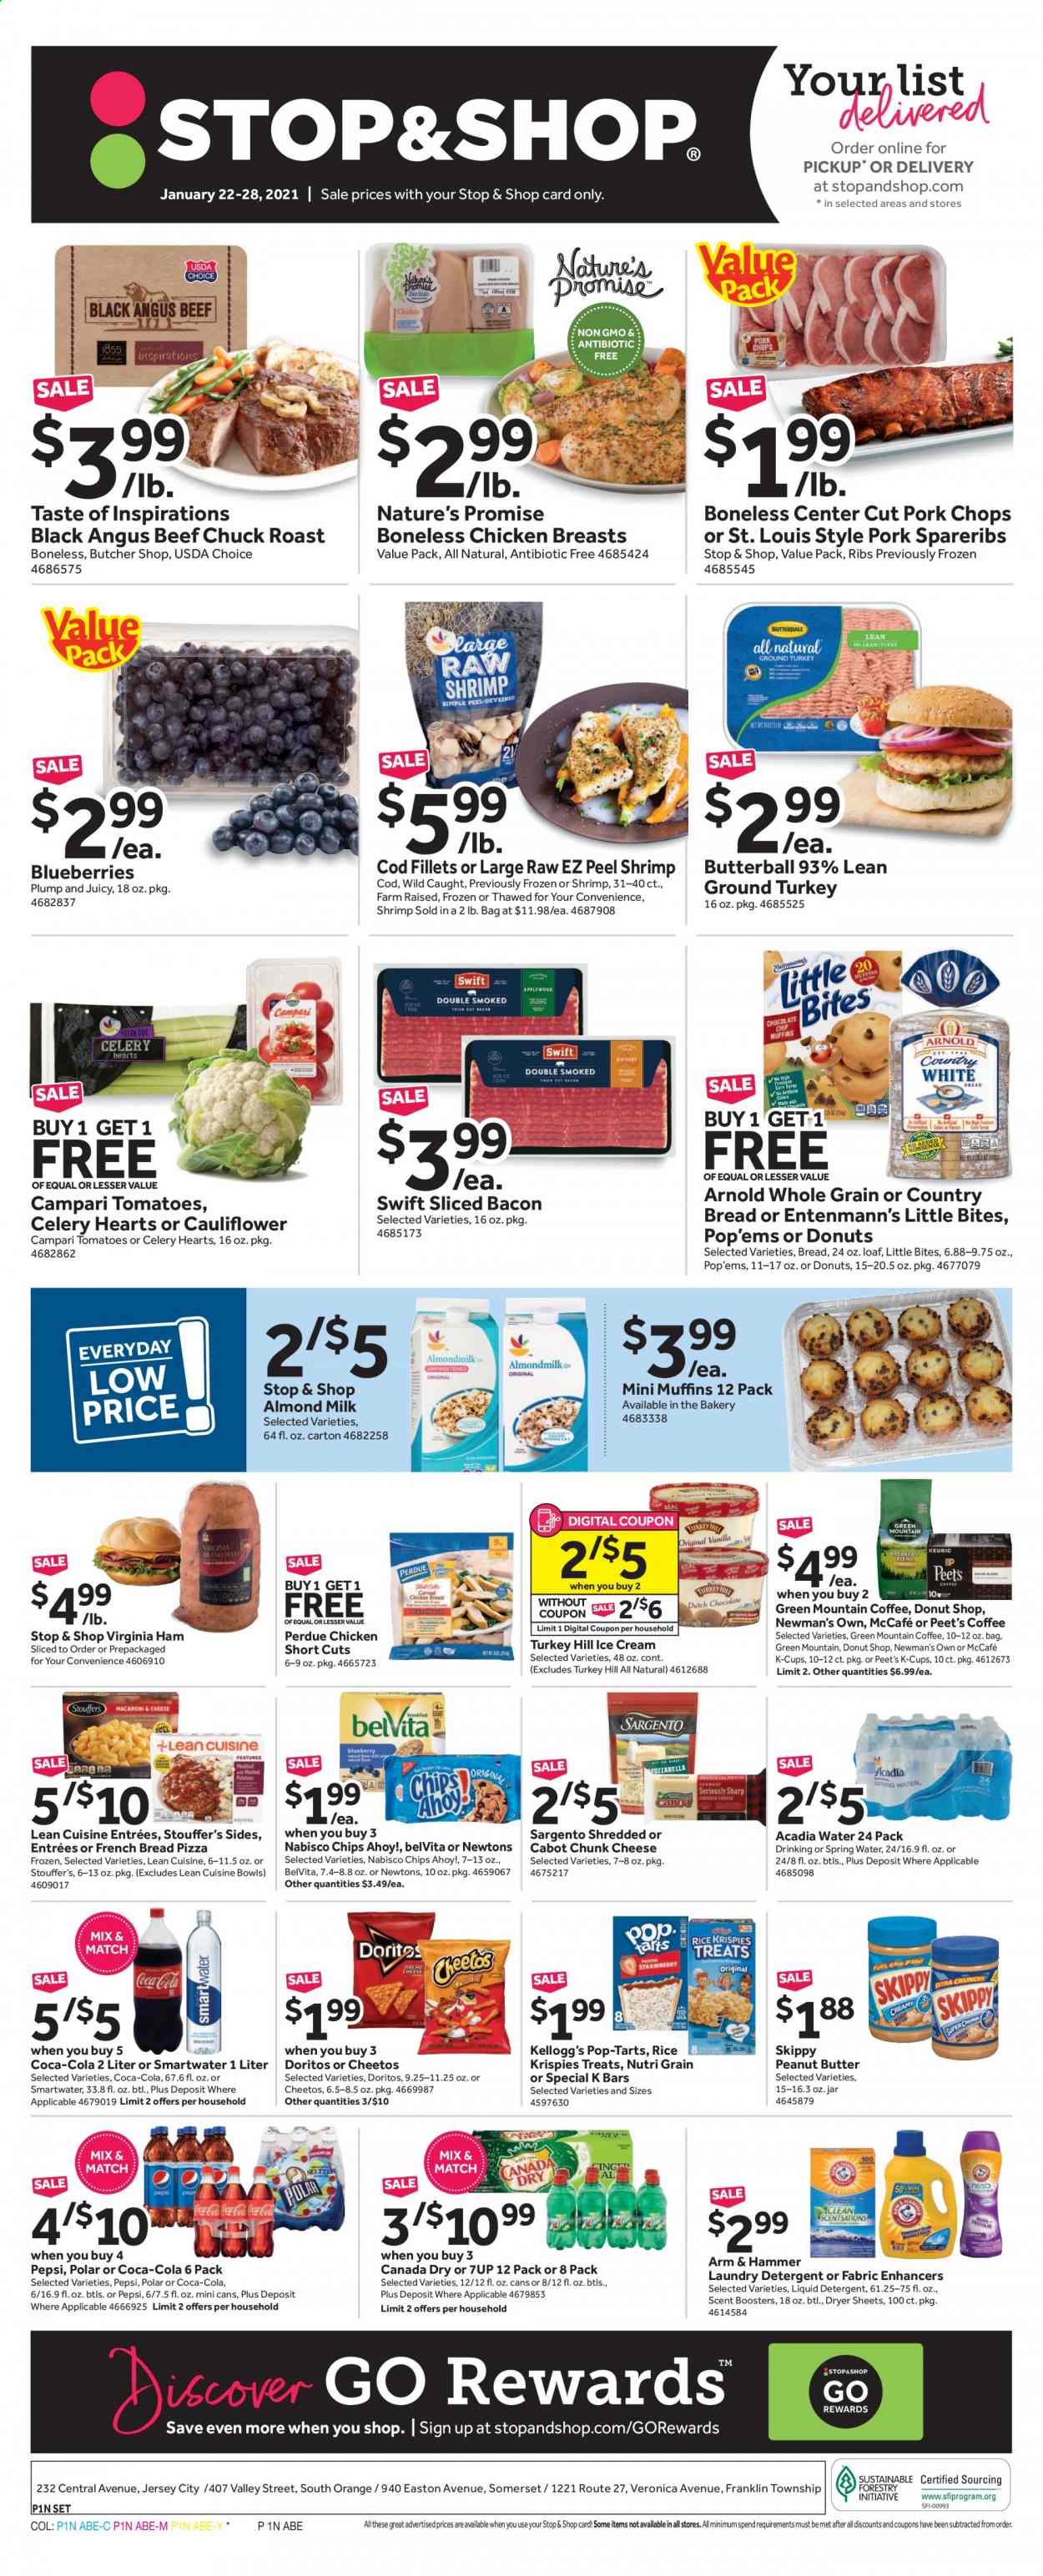 thumbnail - Stop & Shop Flyer - 01/22/2021 - 01/28/2021 - Sales products - blueberries, bread, Nature’s Promise, Entenmann's, Little Bites, Butterball, ground turkey, chicken breasts, Perdue®, beef meat, chuck roast, pork chops, pork meat, pork spare ribs, cod, shrimps, pizza, Lean Cuisine, bacon, ham, virginia ham, cheese, chunk cheese, Sargento, almond milk, ice cream, celery, Kellogg's, Pop-Tarts, Chips Ahoy!, Doritos, Cheetos, ARM & HAMMER, Rice Krispies, belVita, Nutri-Grain, peanut butter, Canada Dry, Coca-Cola, Pepsi, 7UP, spring water, Acadia, coffee capsules, McCafe, K-Cups, Green Mountain, laundry detergent, dryer sheets, scent booster, liquid detergent. Page 1.